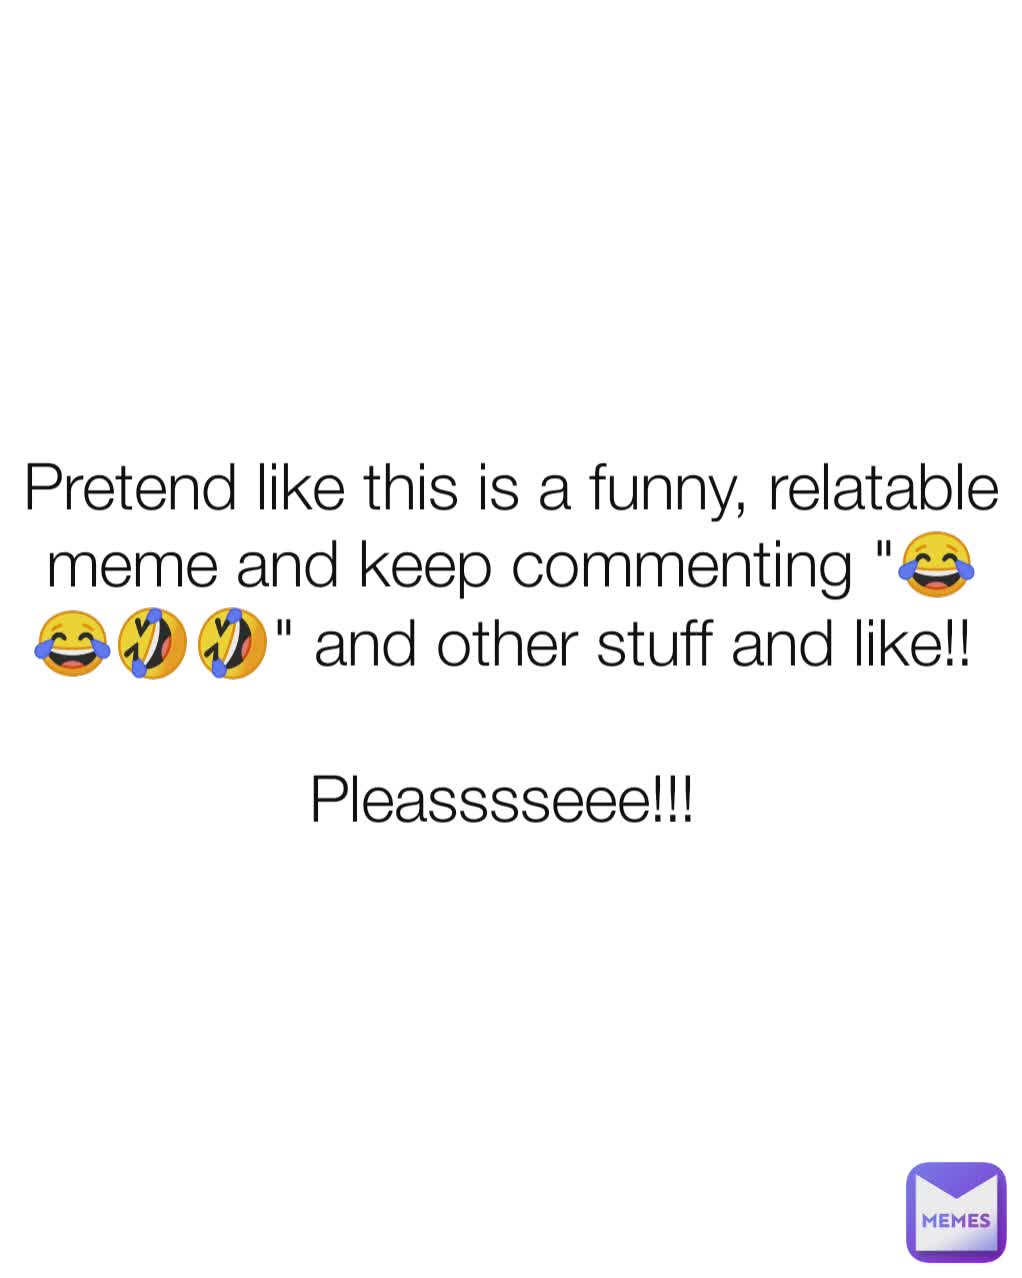 Pretend like this is a funny, relatable meme and keep commenting "😂😂🤣🤣" and other stuff and like!! 

Pleasssseee!!! 